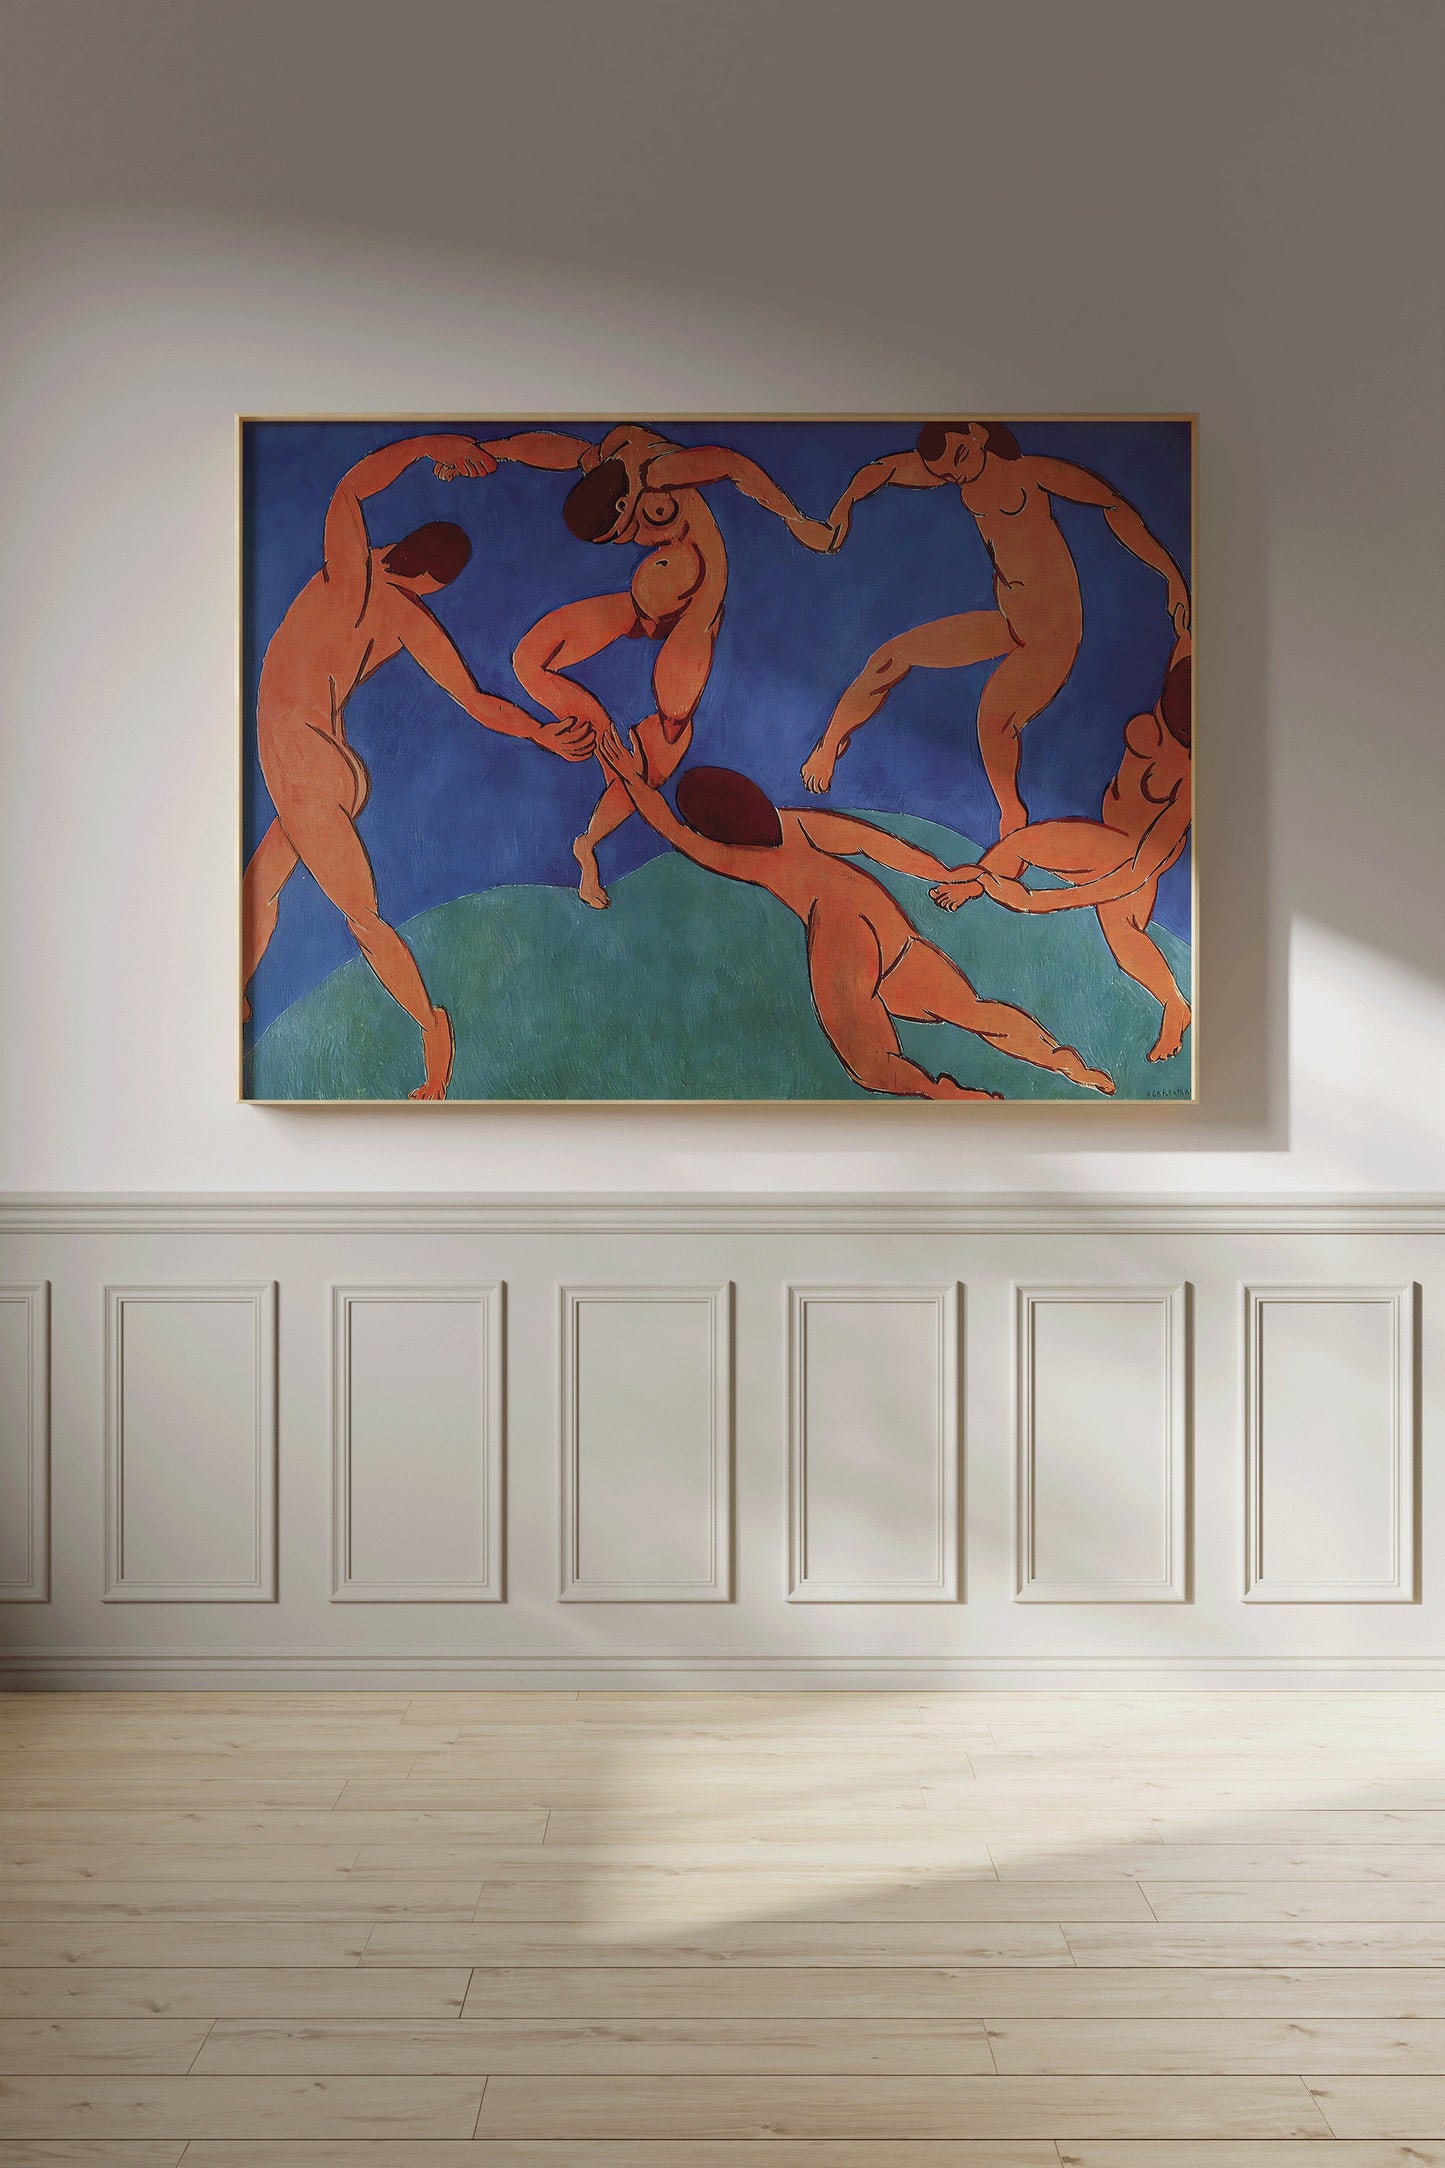 Henri Matisse - The Dance | Famous Painting (available unframed or framed ready to hang)